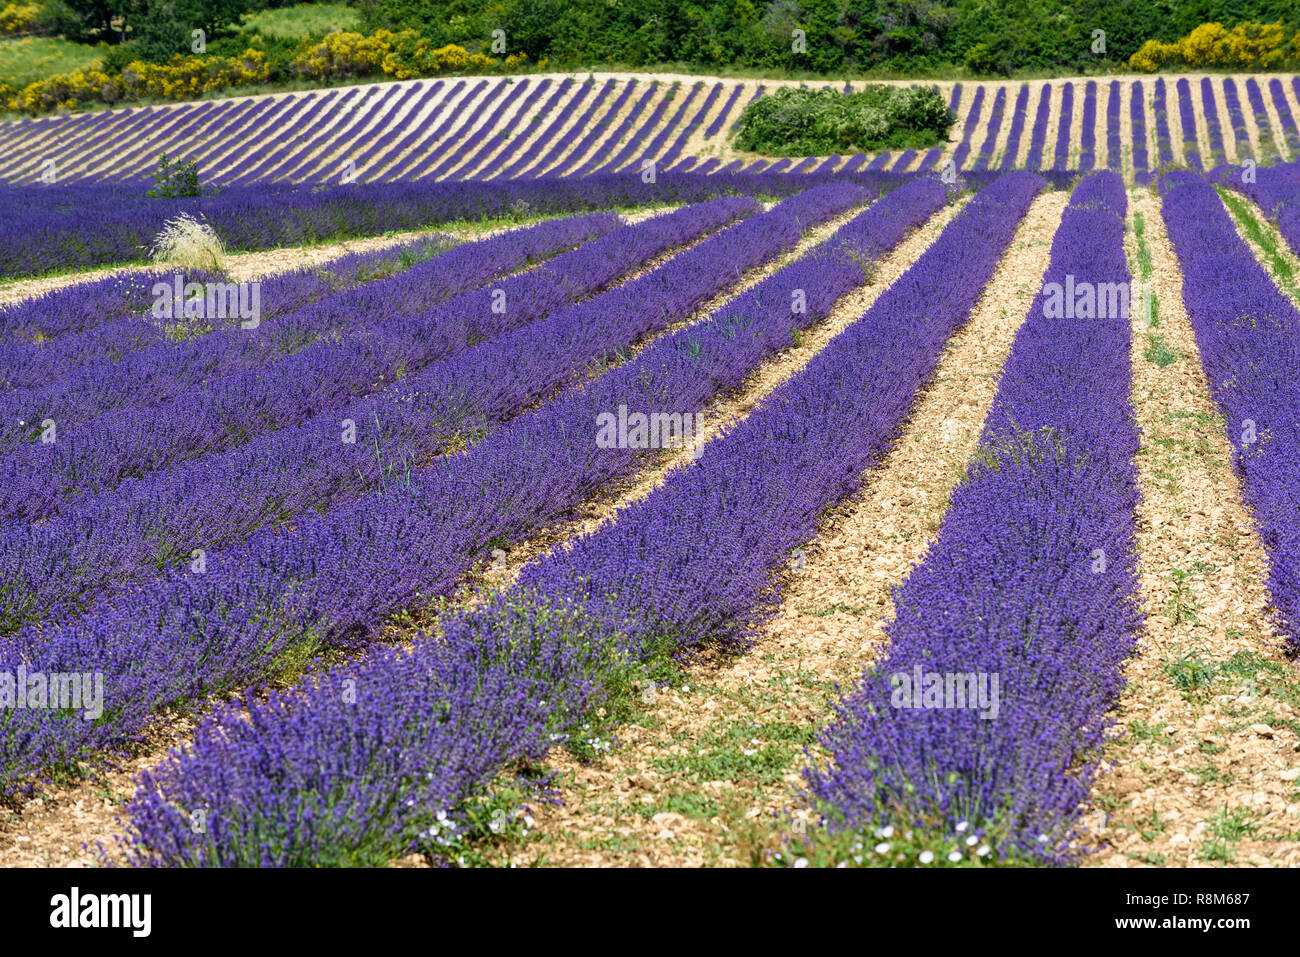 Rows of lavender flowers ready for harvest on a sunny June day in a lavender field near Sault, Provence, France Stock Photo